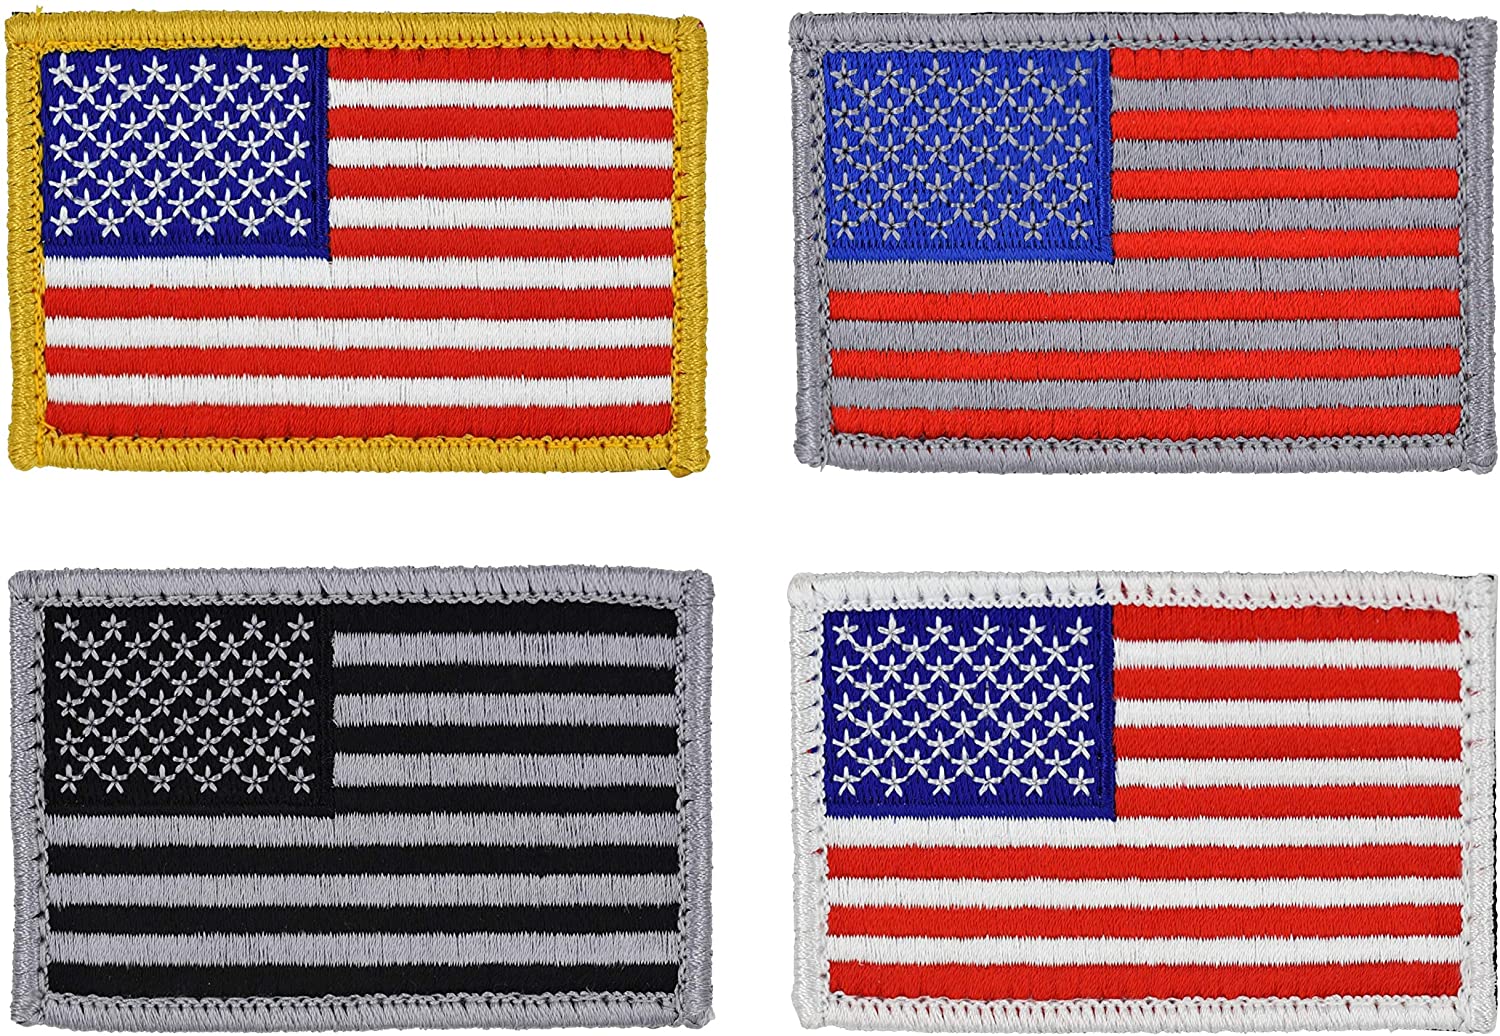 American Flag Patch 4-Pack Set, Embroidered, Hook and Loop (American Flags)